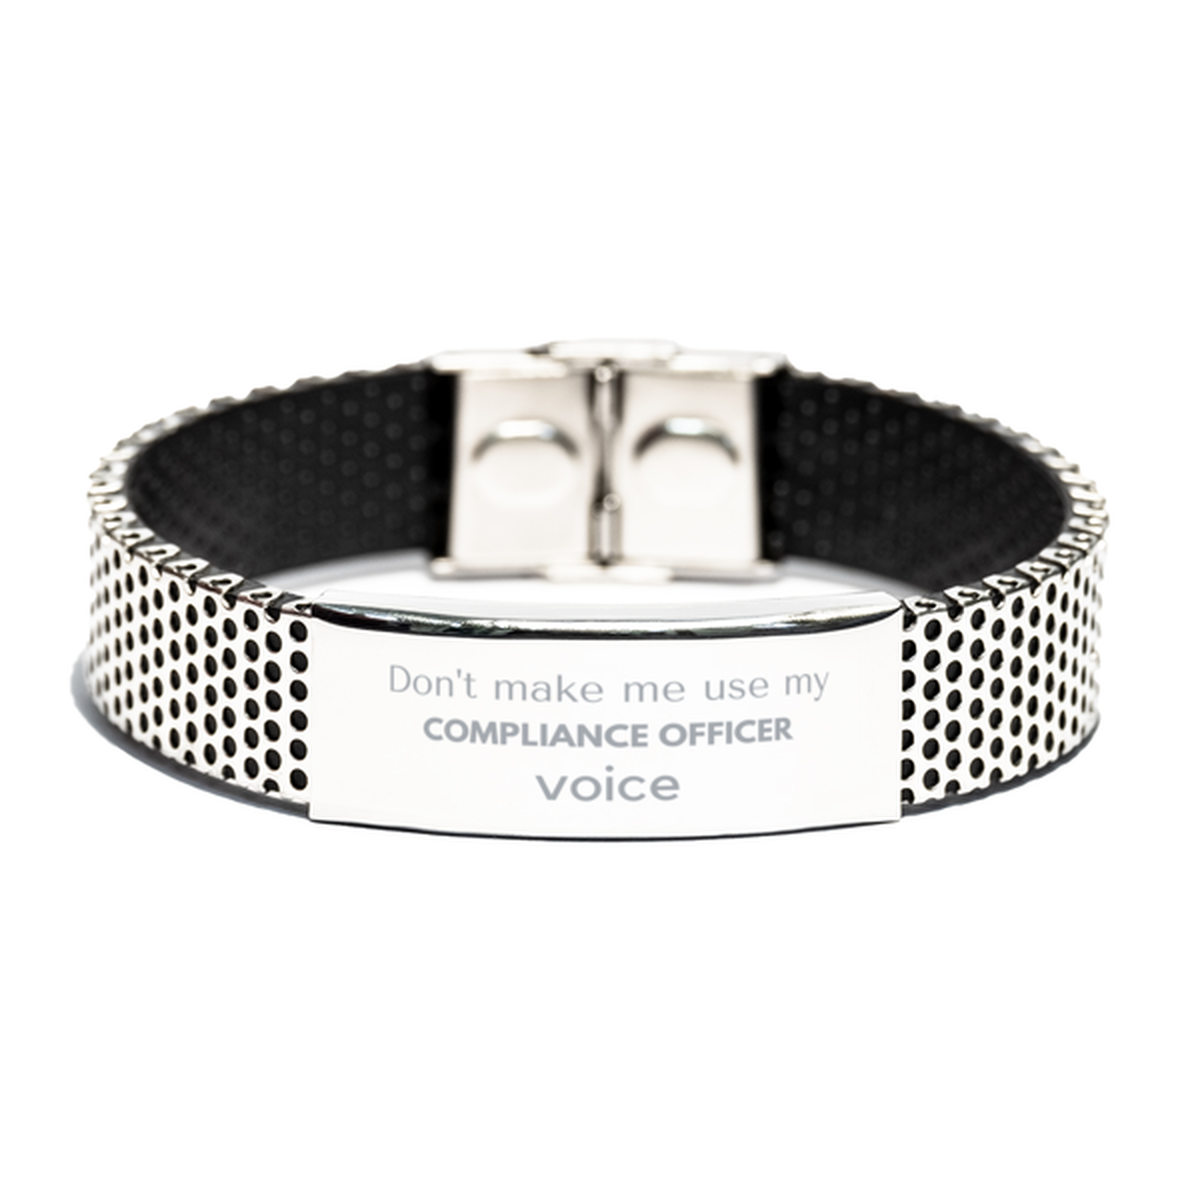 Don't make me use my Compliance Officer voice, Sarcasm Compliance Officer Gifts, Christmas Compliance Officer Stainless Steel Bracelet Birthday Unique Gifts For Compliance Officer Coworkers, Men, Women, Colleague, Friends